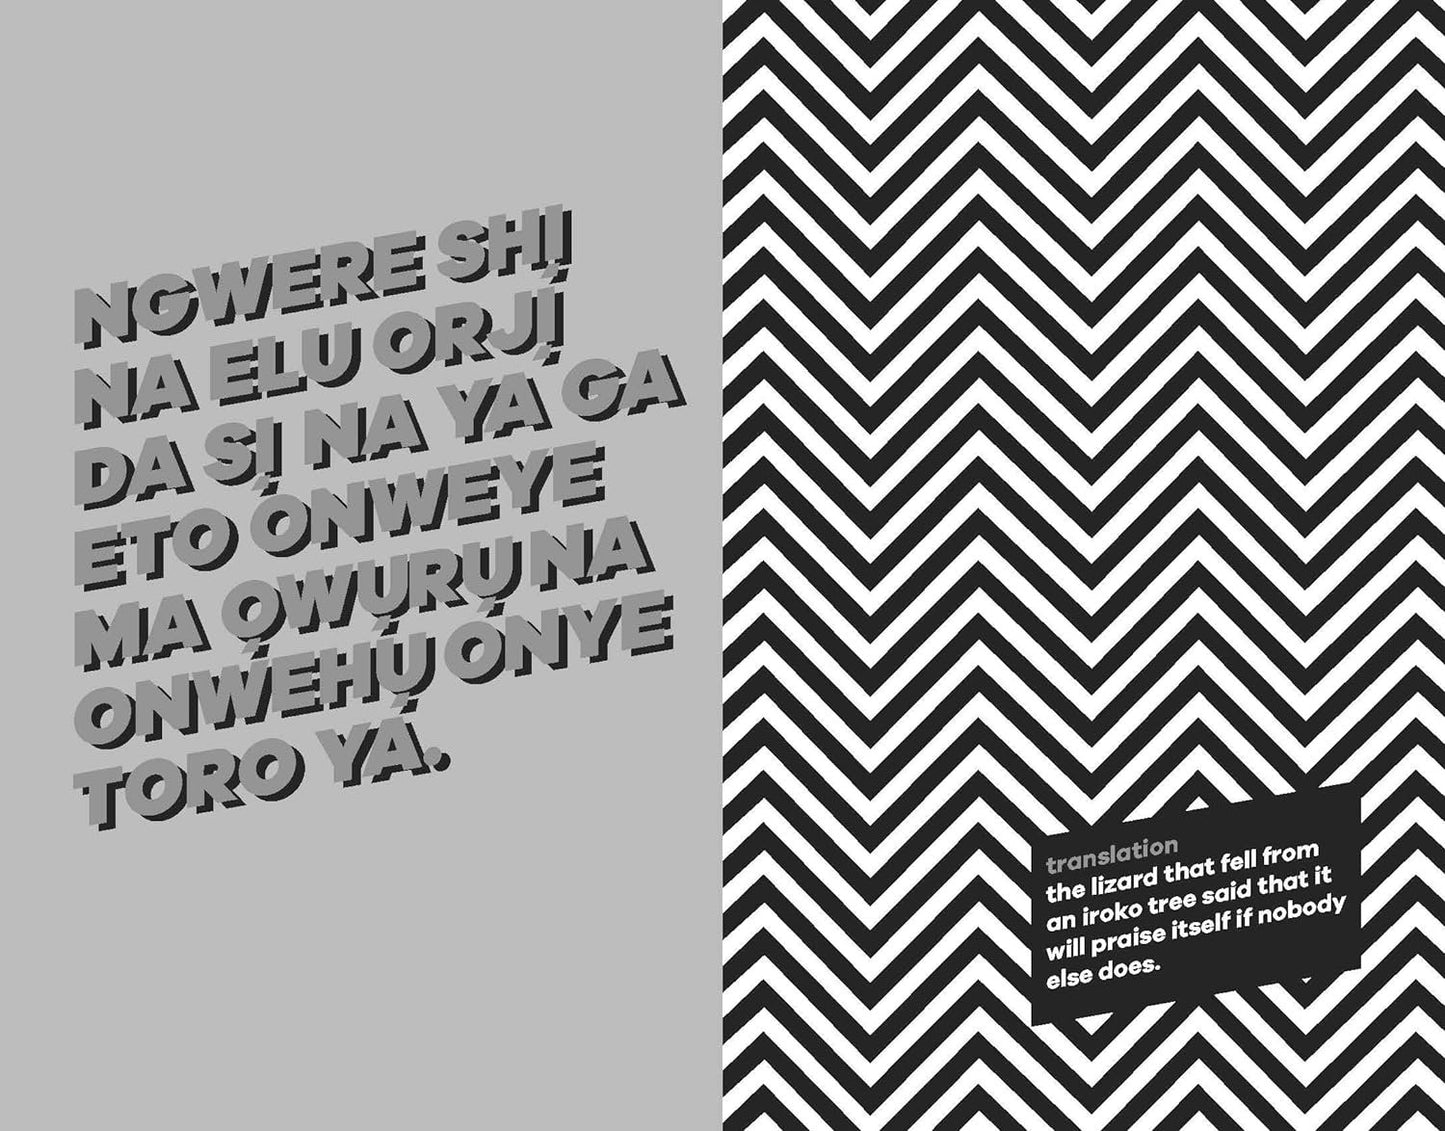 The image features a high contrast graphic design with two halves. The left side bears a block of untranslated text while the right side shows a zigzag black and white pattern with an English translation titled "What a Time to Journal: Work Out Why You Are Already Enough by Chidera Eggerue (Author).